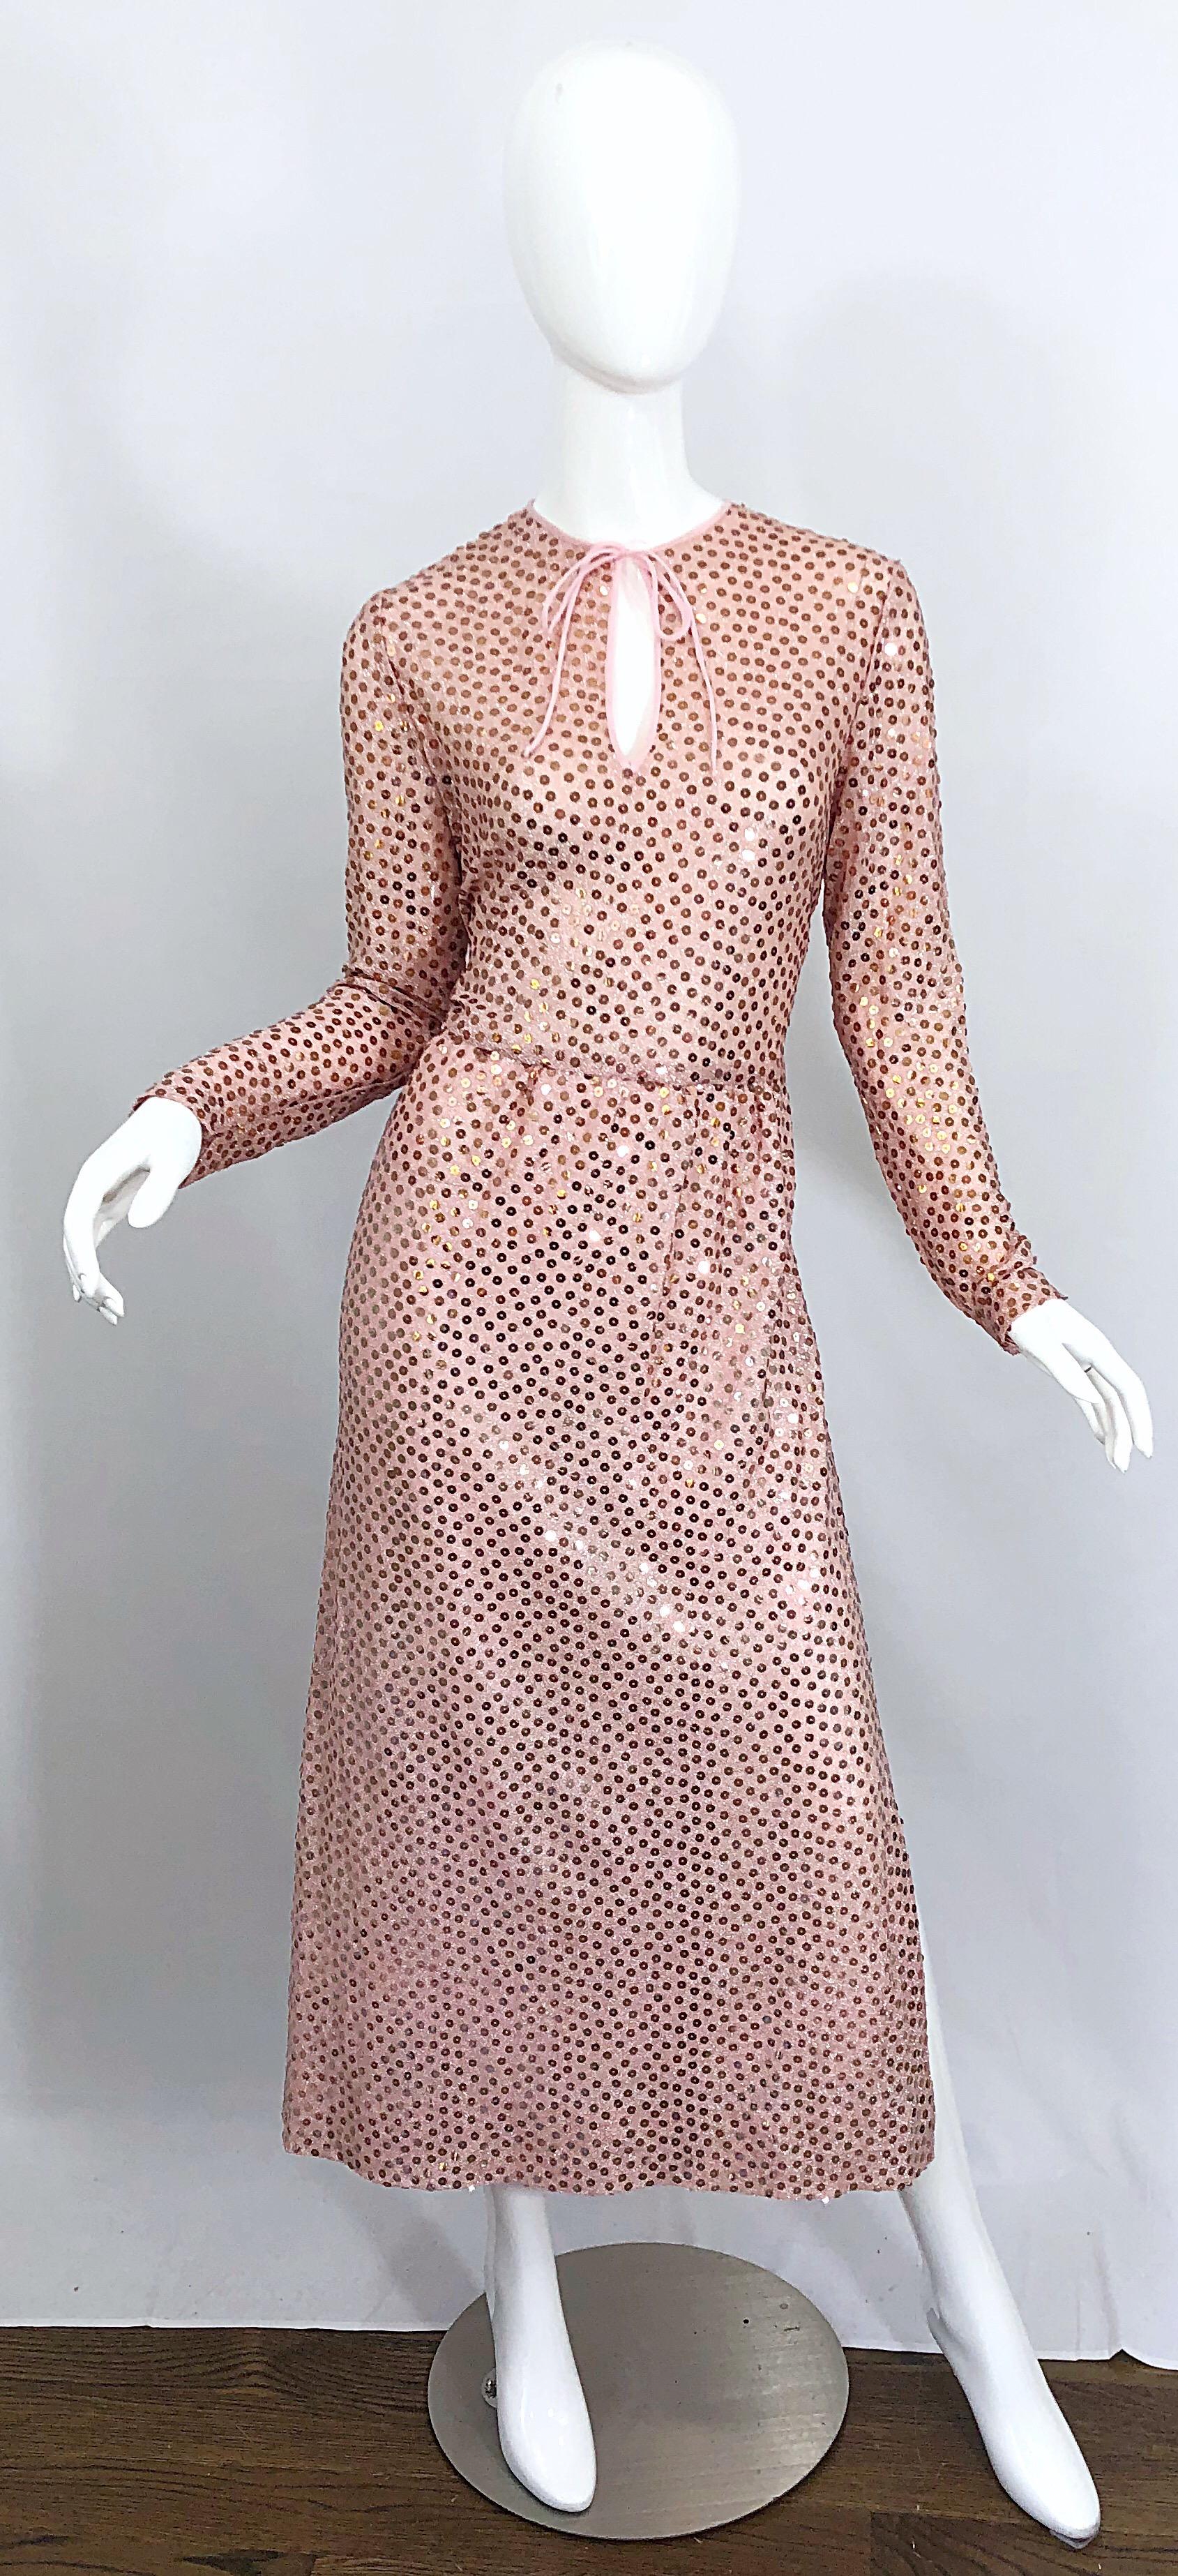 Beautiful 1970s MOLLIE PARNIS pink lurex evening dress! Features thousands of hand-sewn rose gold sequins throughout. Hidden zipper up the back with hook-and-eye closure. Keyhole opening at center neck ties shut with two pink chiffon ties. Slit up